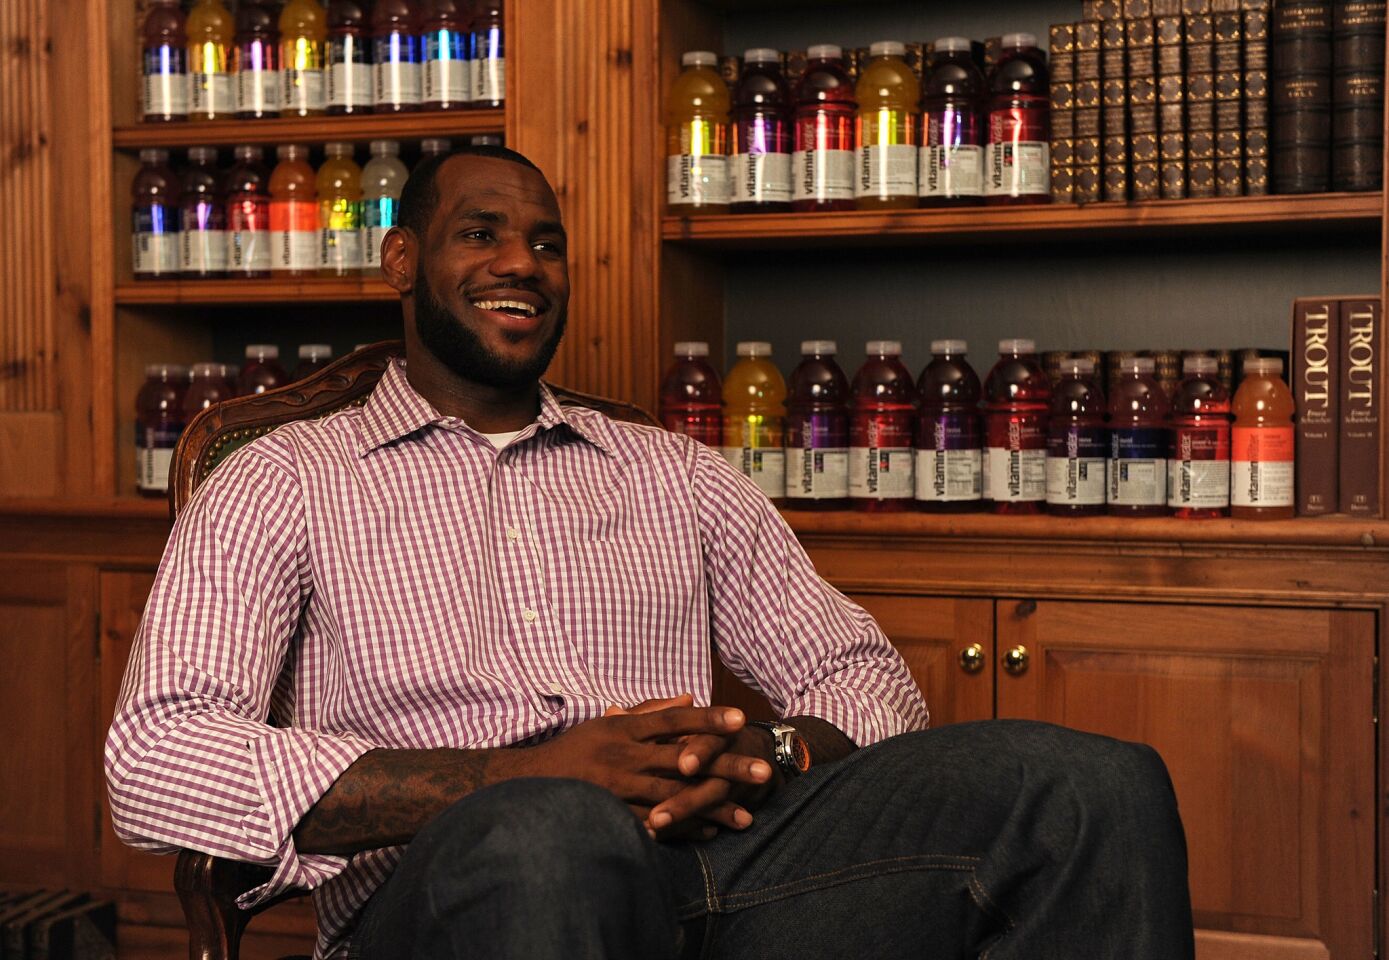 The decision: LeBron James attends the LeBron James Pre Decision Meet and Greet on July 8, 2010, in Greenwich, Conn. Proceeds from the $2.5-million event were donated to the Boys & Girls Clubs of America.